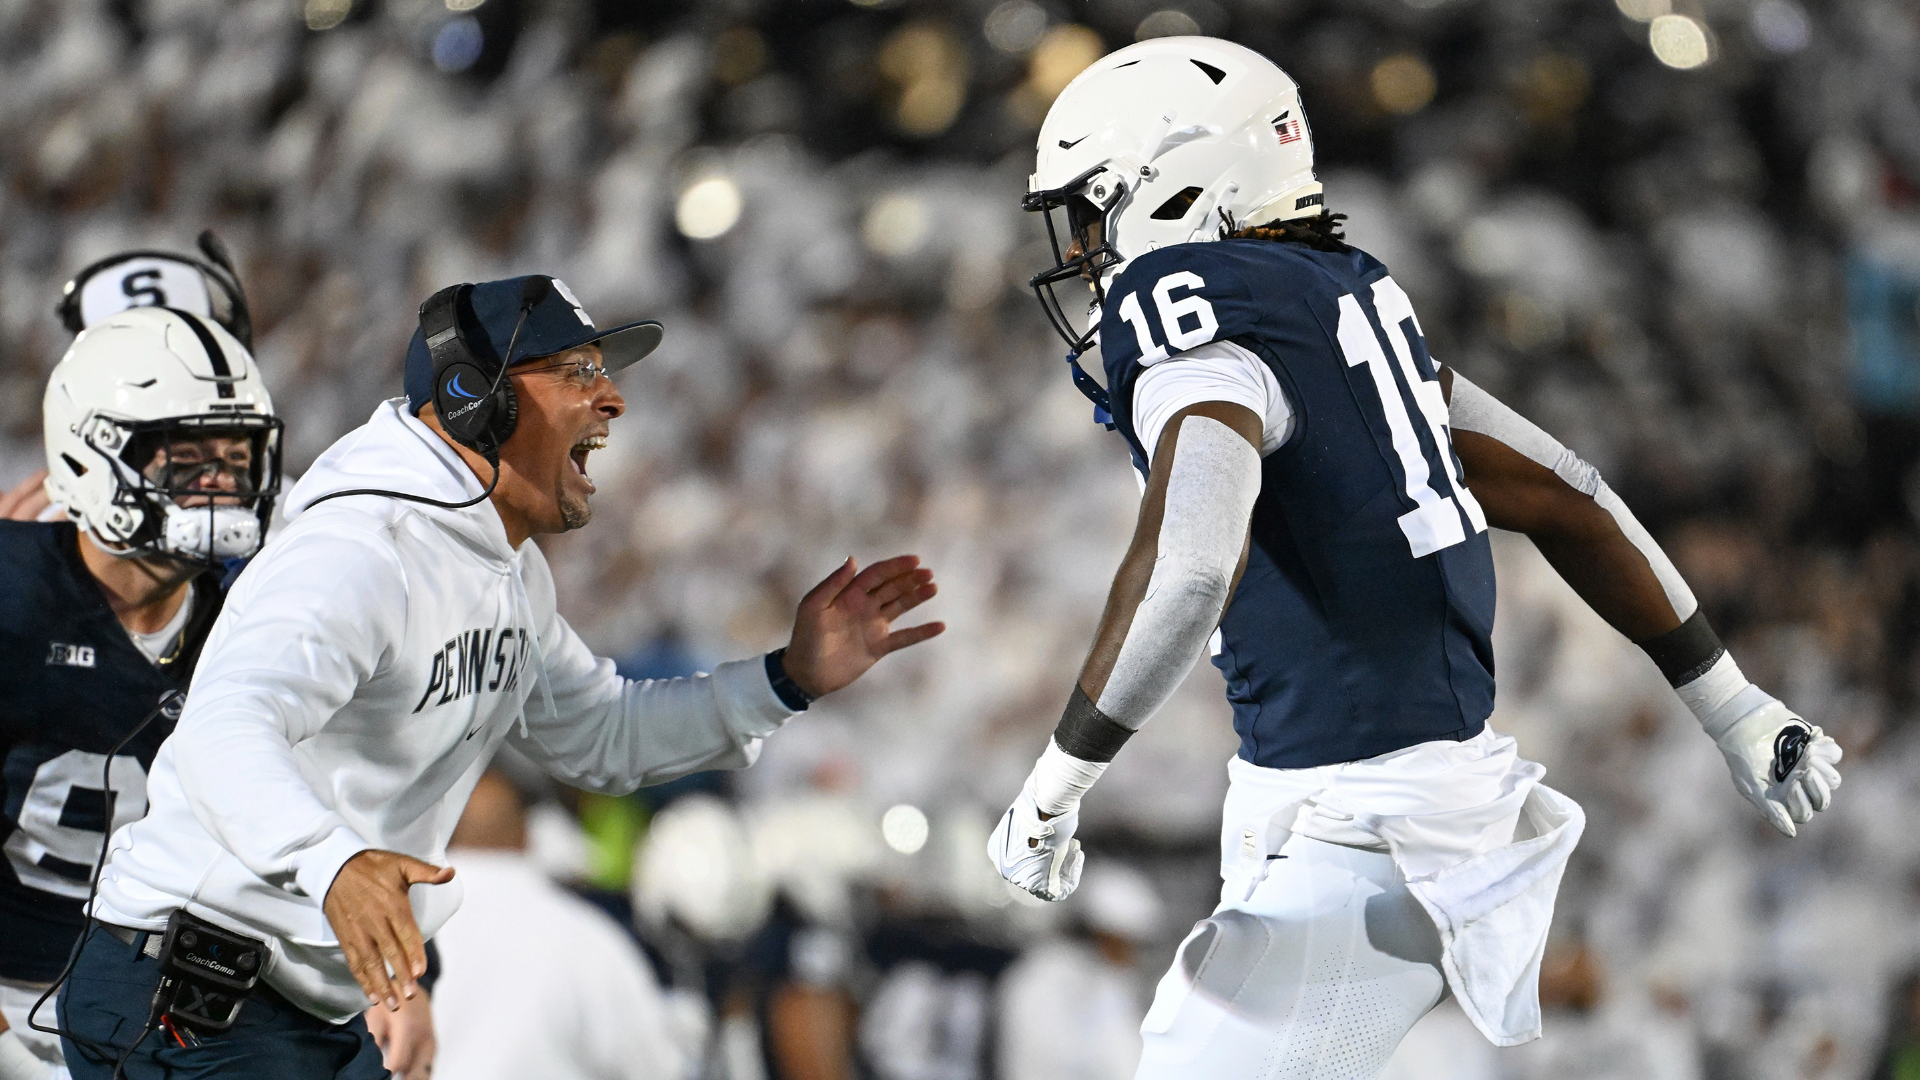 Penn State coach James Franklin spoke to the media after his team's 31-0 win over Iowa during its "White Out" game.